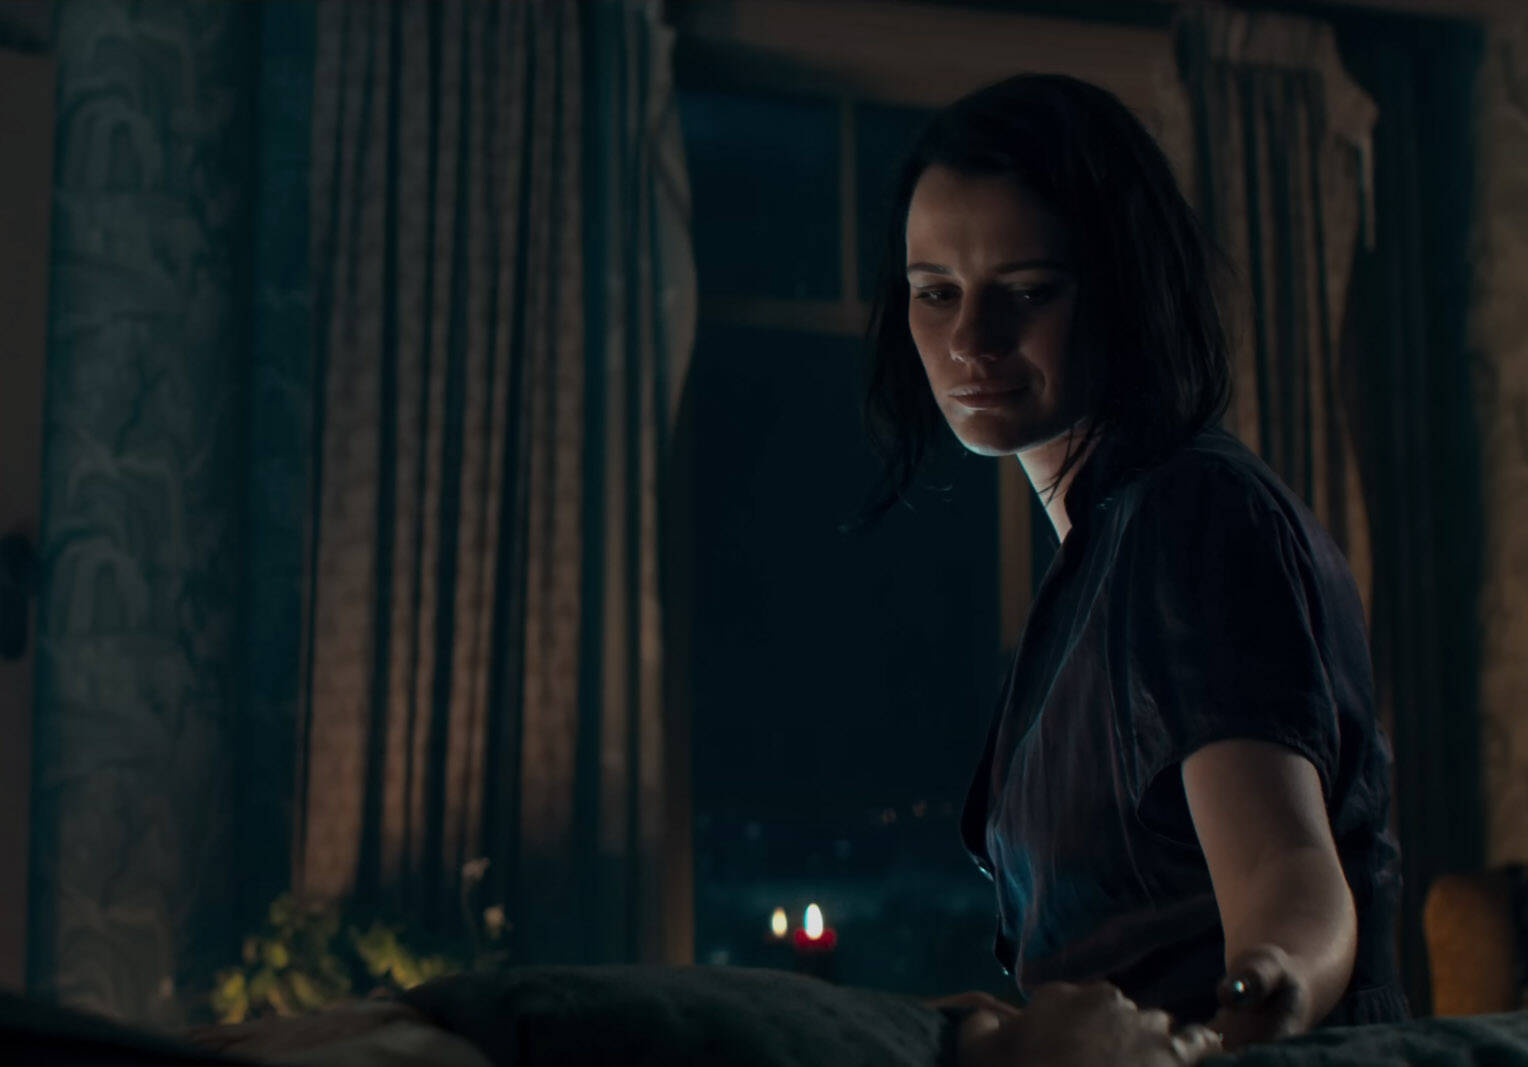 Beth, played by Lily Sullivan, reaches for the hand of her late sister in "Evil Dead Rise." (Photo courtesy Warner Bros. Pictures)